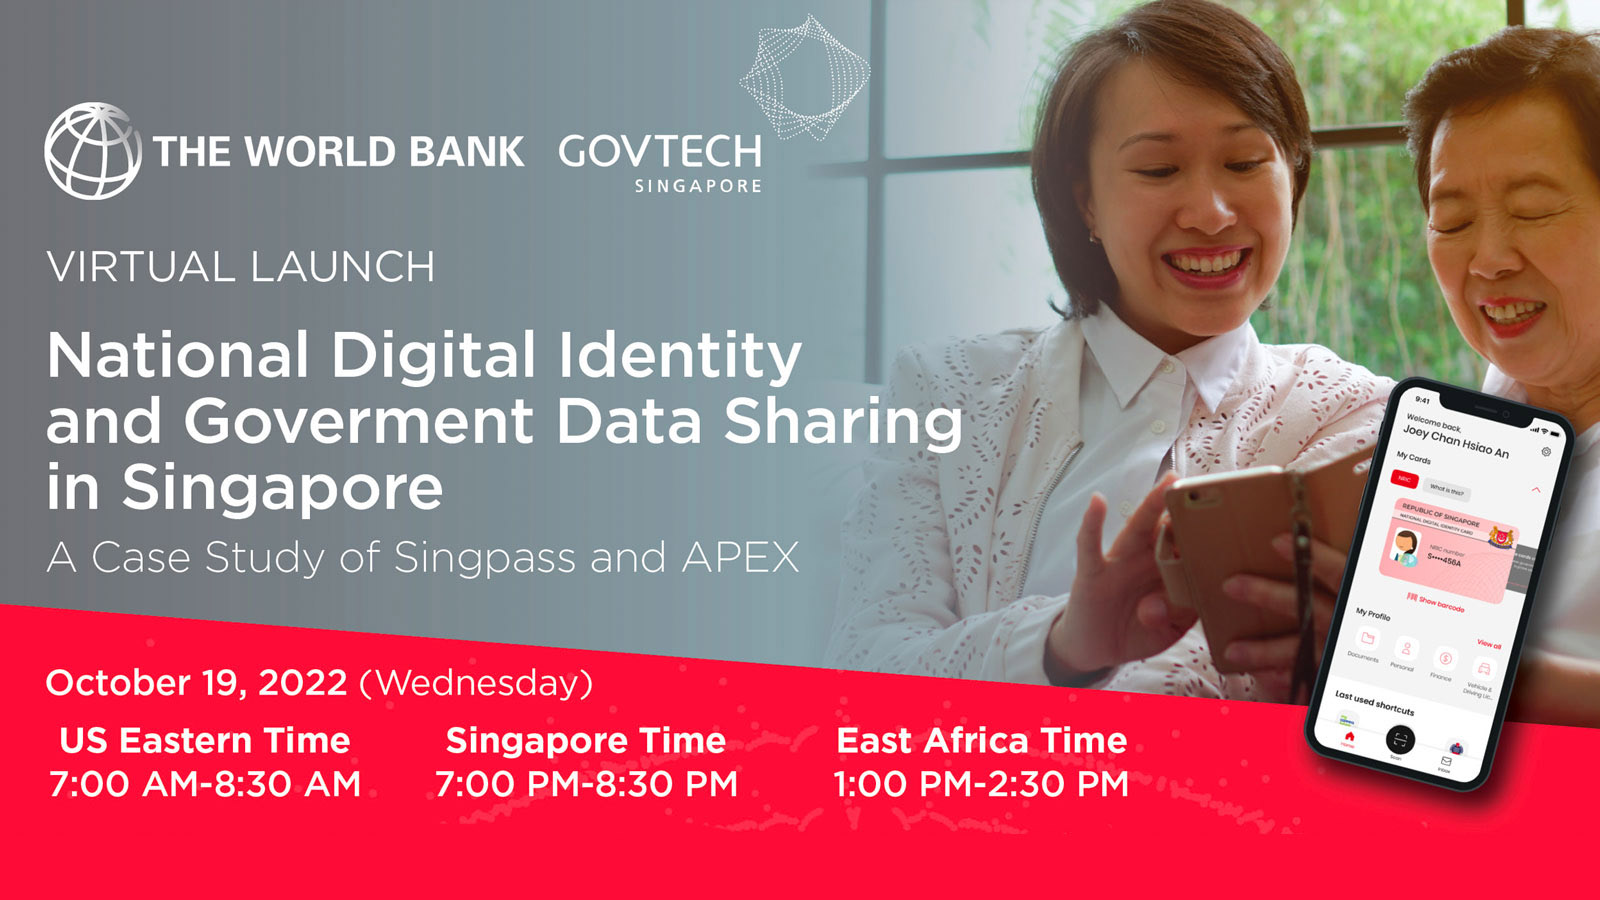 National Digital Identity and Government Data Sharing in Singapore (A Case Study of Singpass and APEX)